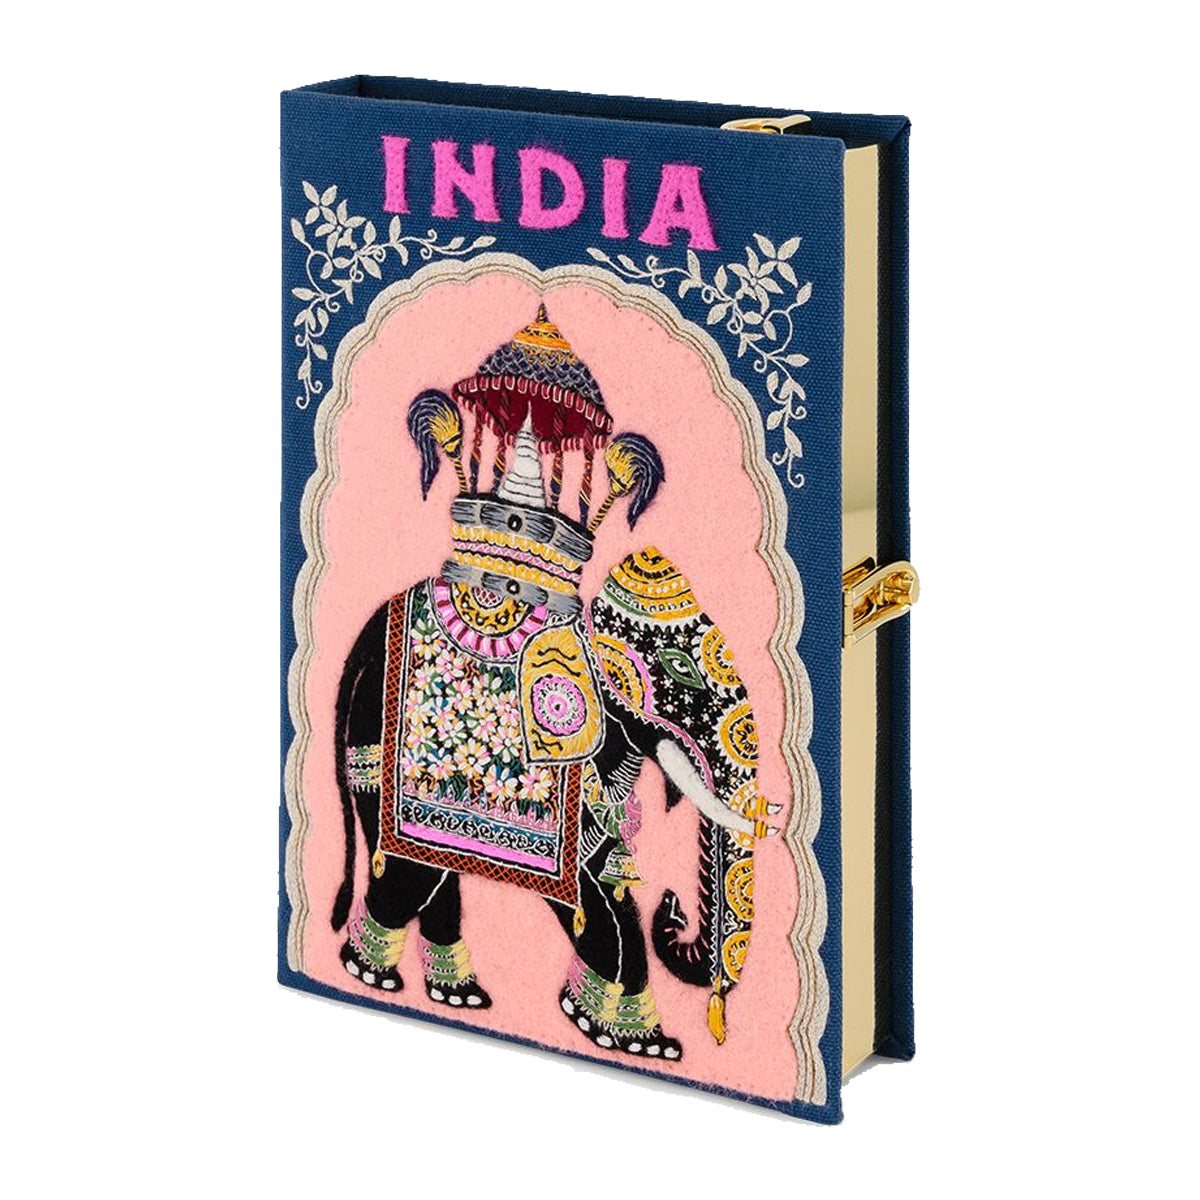 India Book Clutch with Strap - Olympia Le-Tan